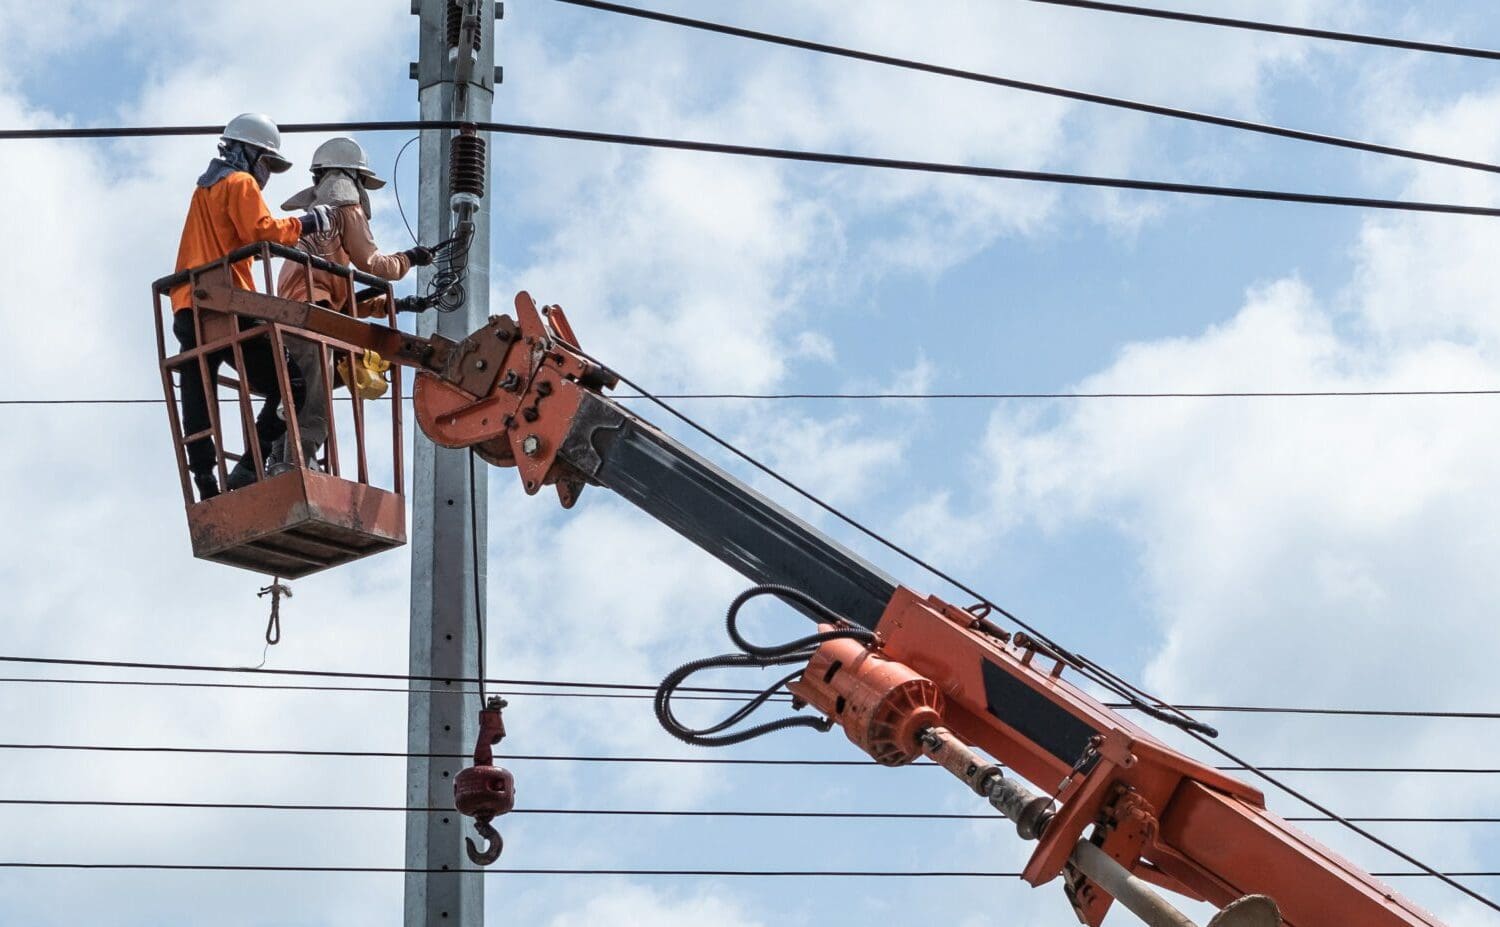 Header image for page showing utility workers.